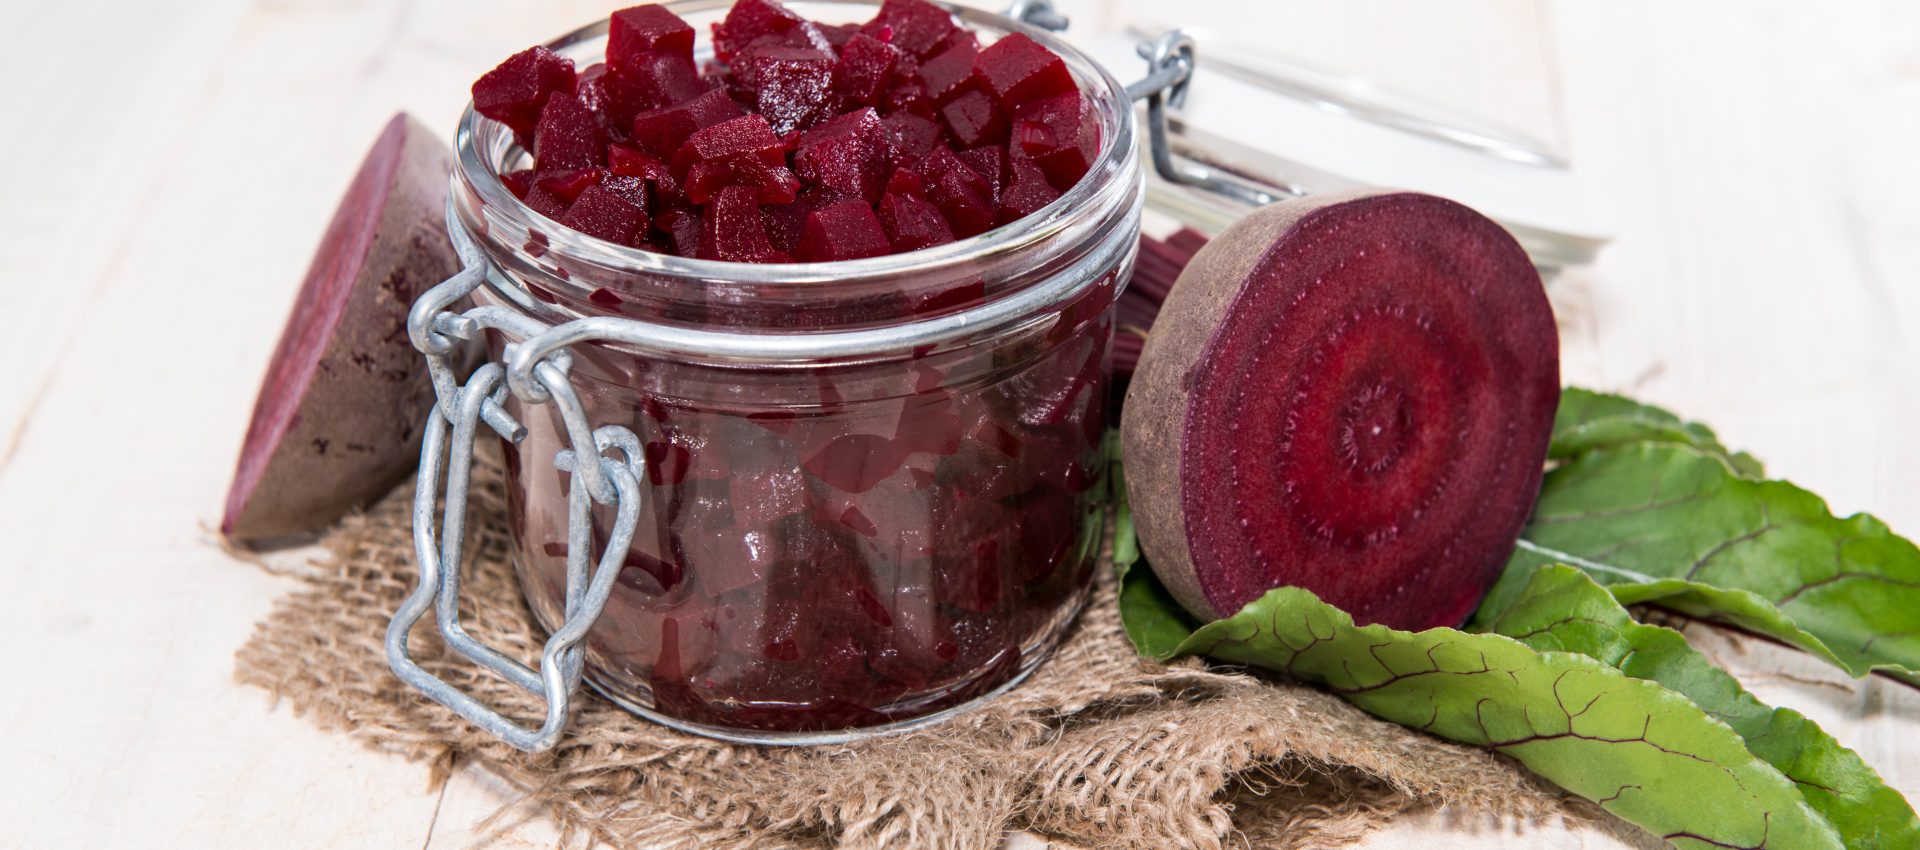 Pickled Beets Recipe - Food In Jars - Homemade - Mrs. Wages®